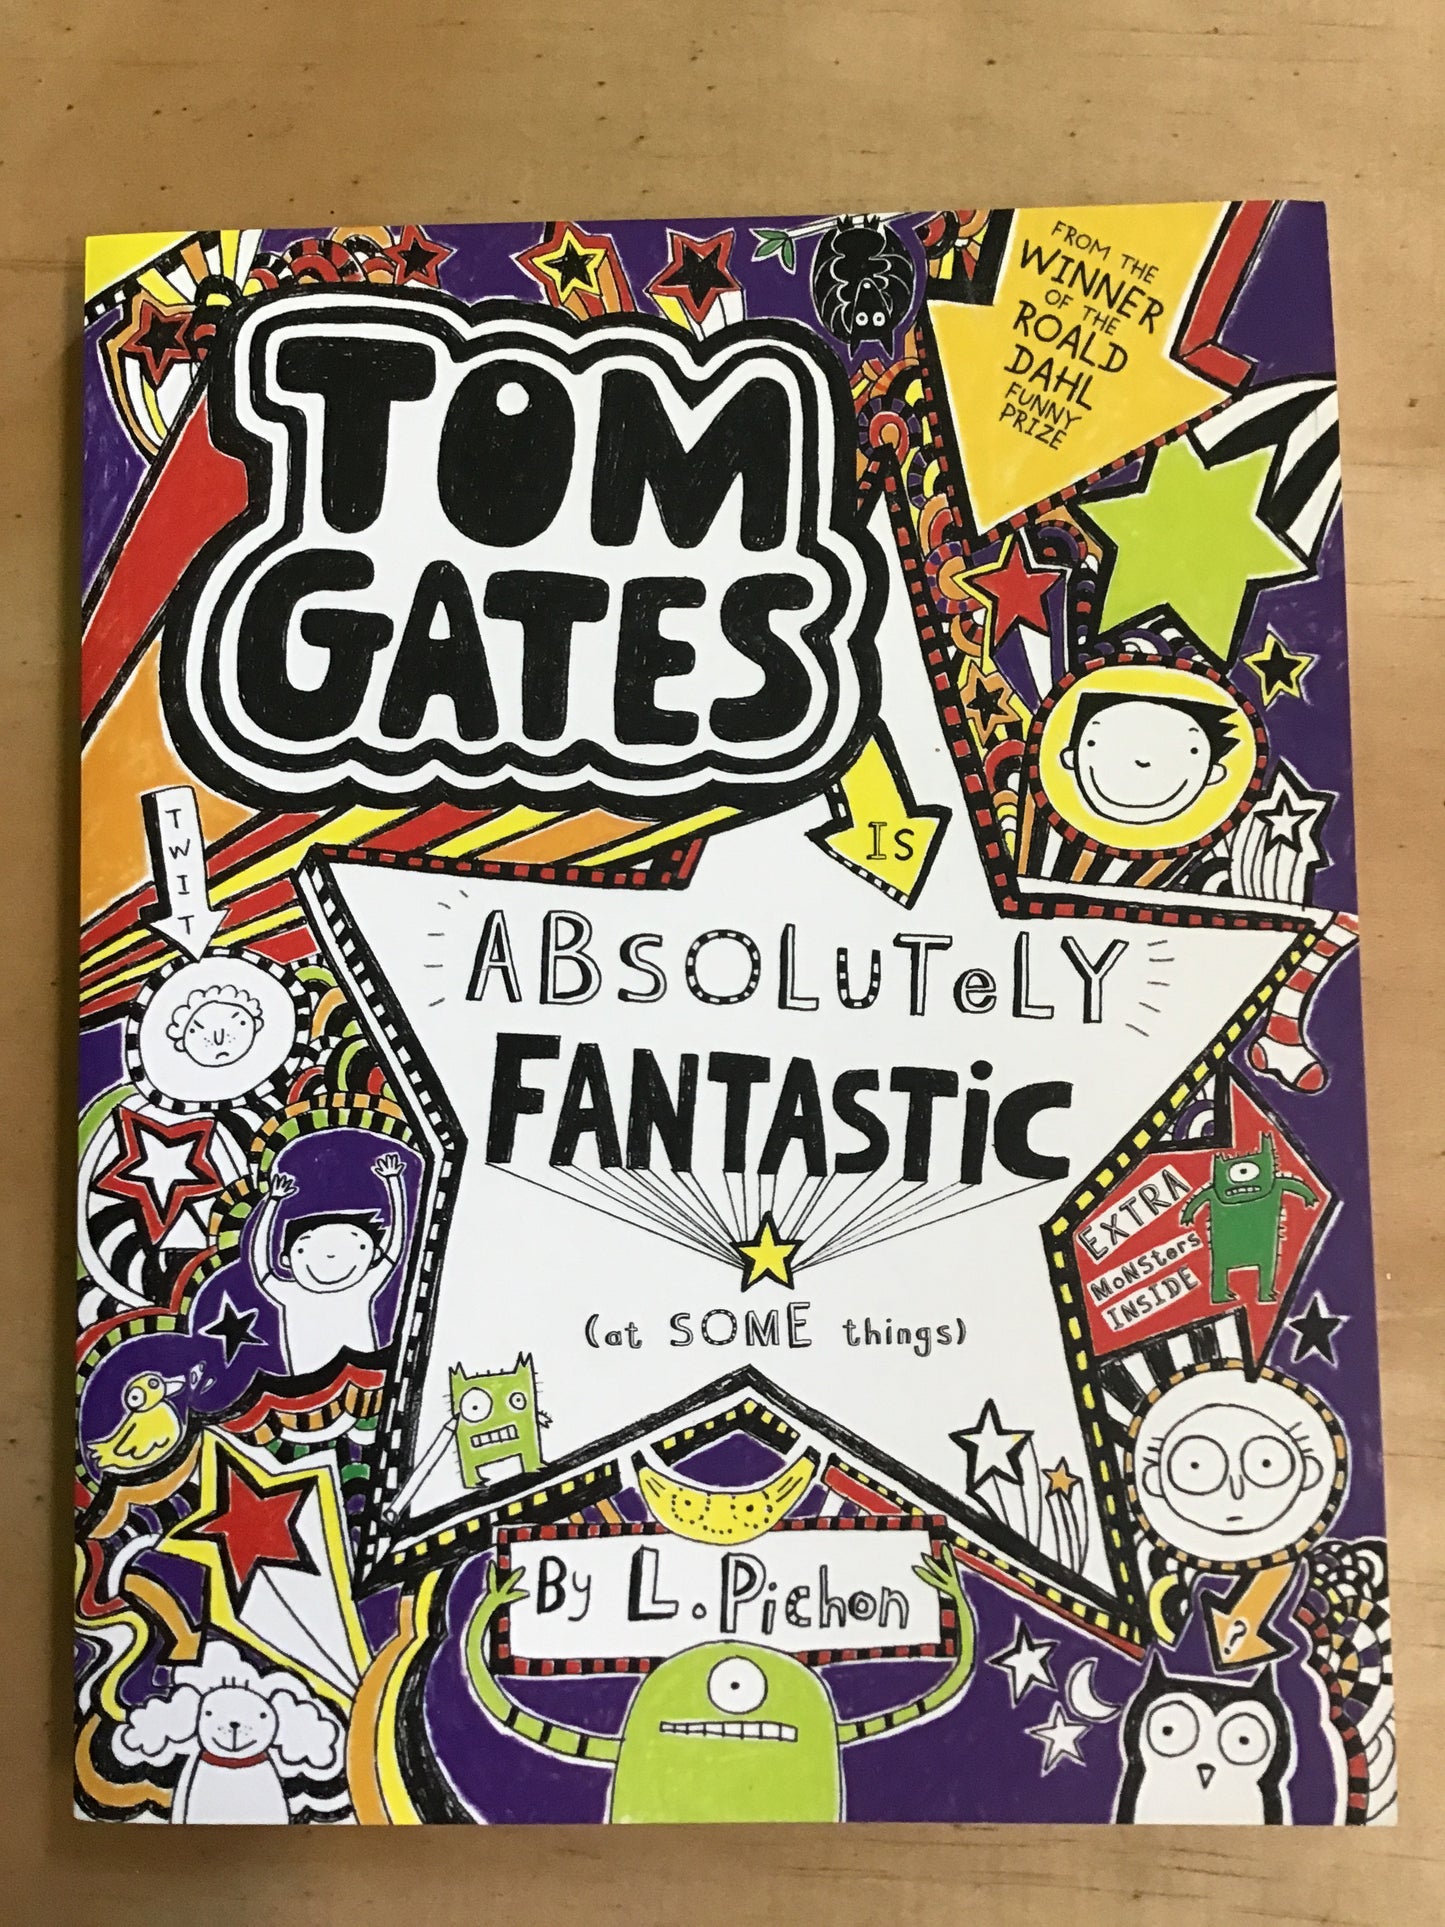 Tom Gates: is Absolutely Fantastic (at some things)